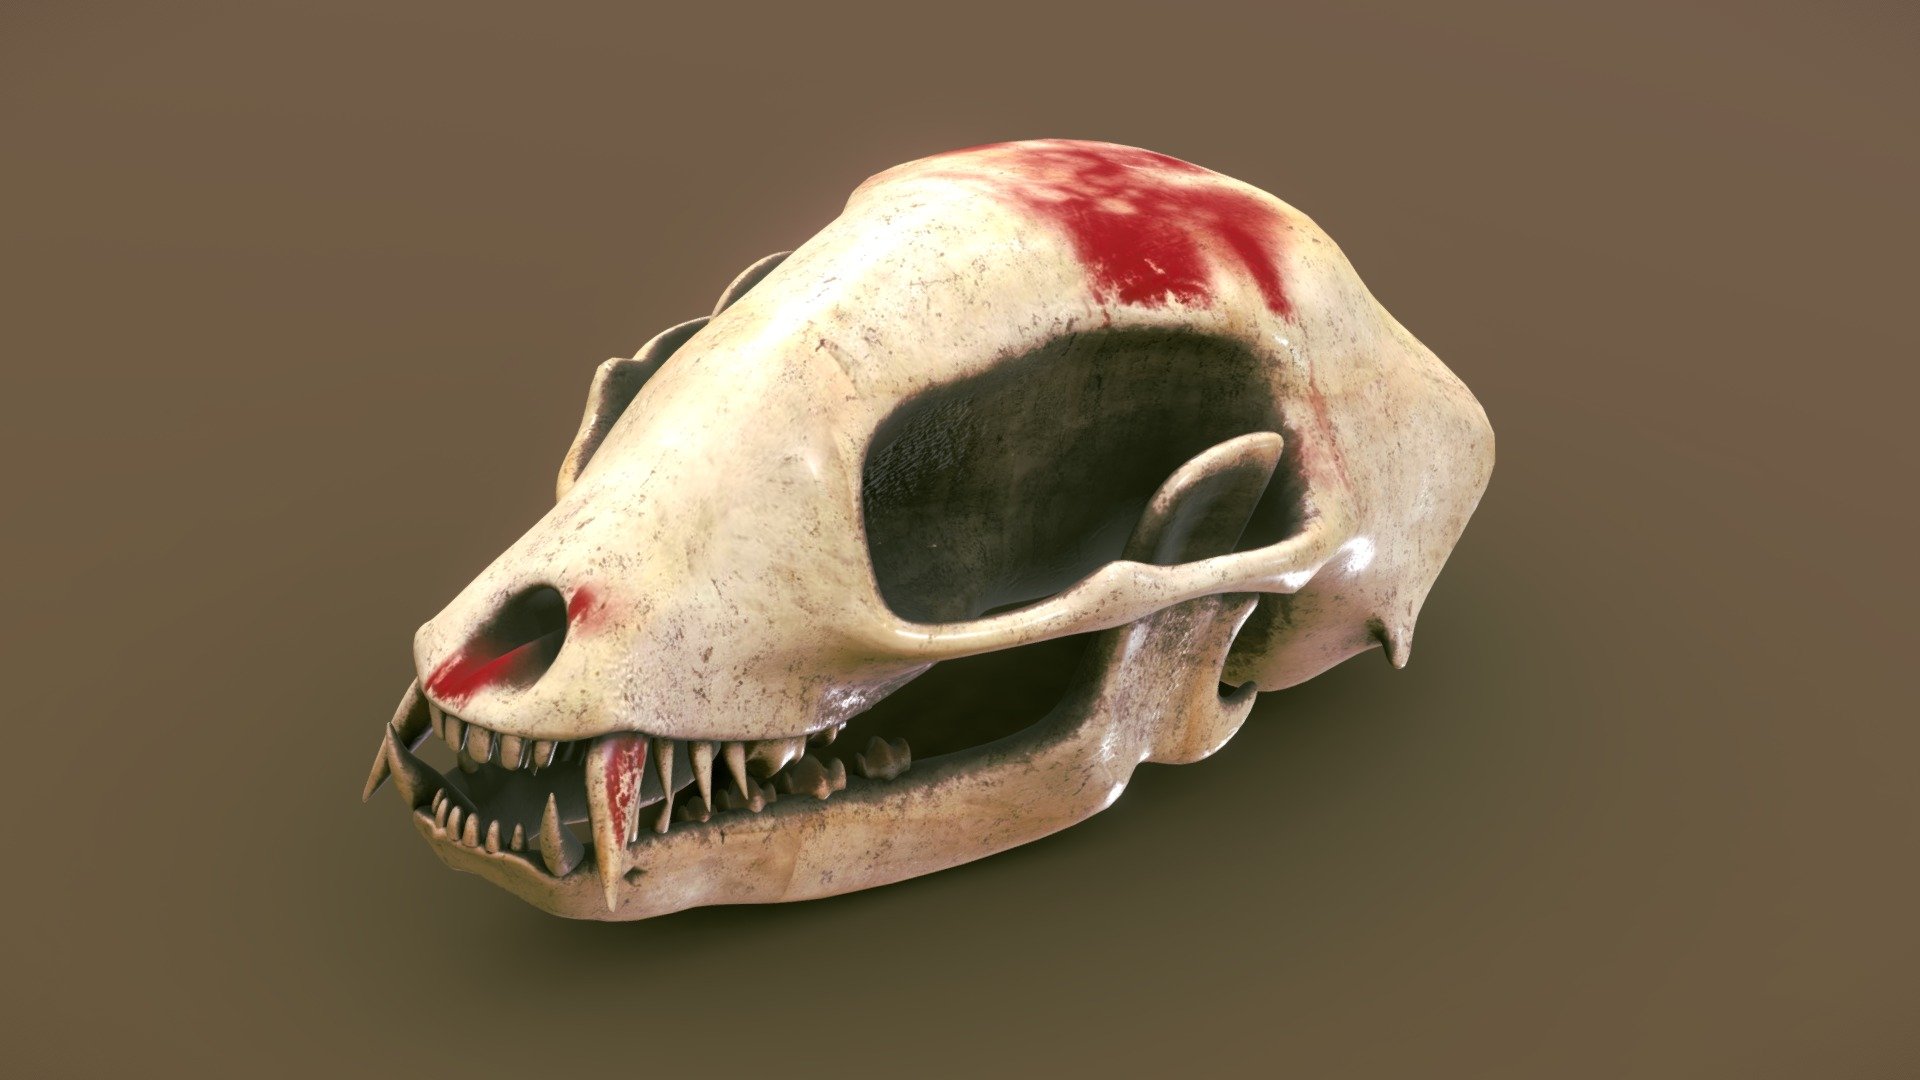 Animal skull stylized asset prop game.

Done on blender and textured on substance painter.
Contact me for special orders 3d model